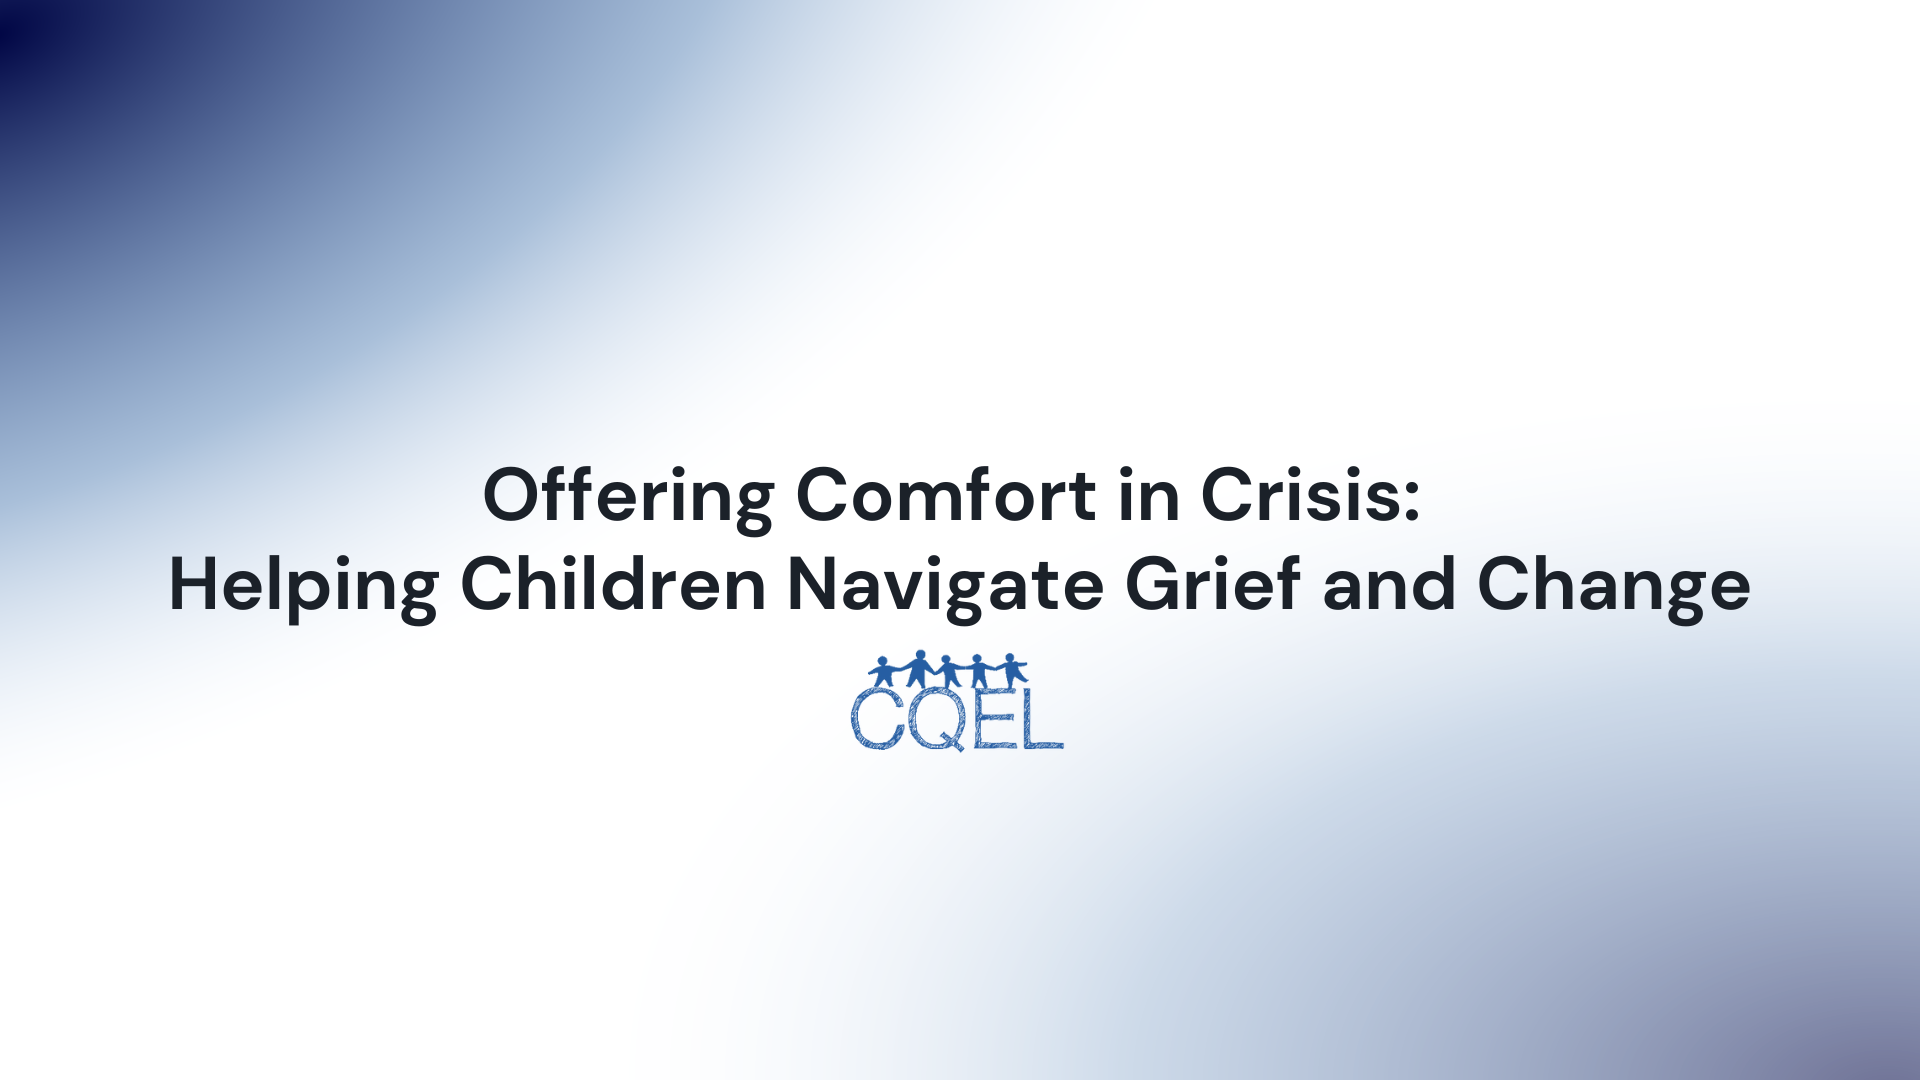 Offering Comfort in Crisis: Helping Children Navigate Grief and Change